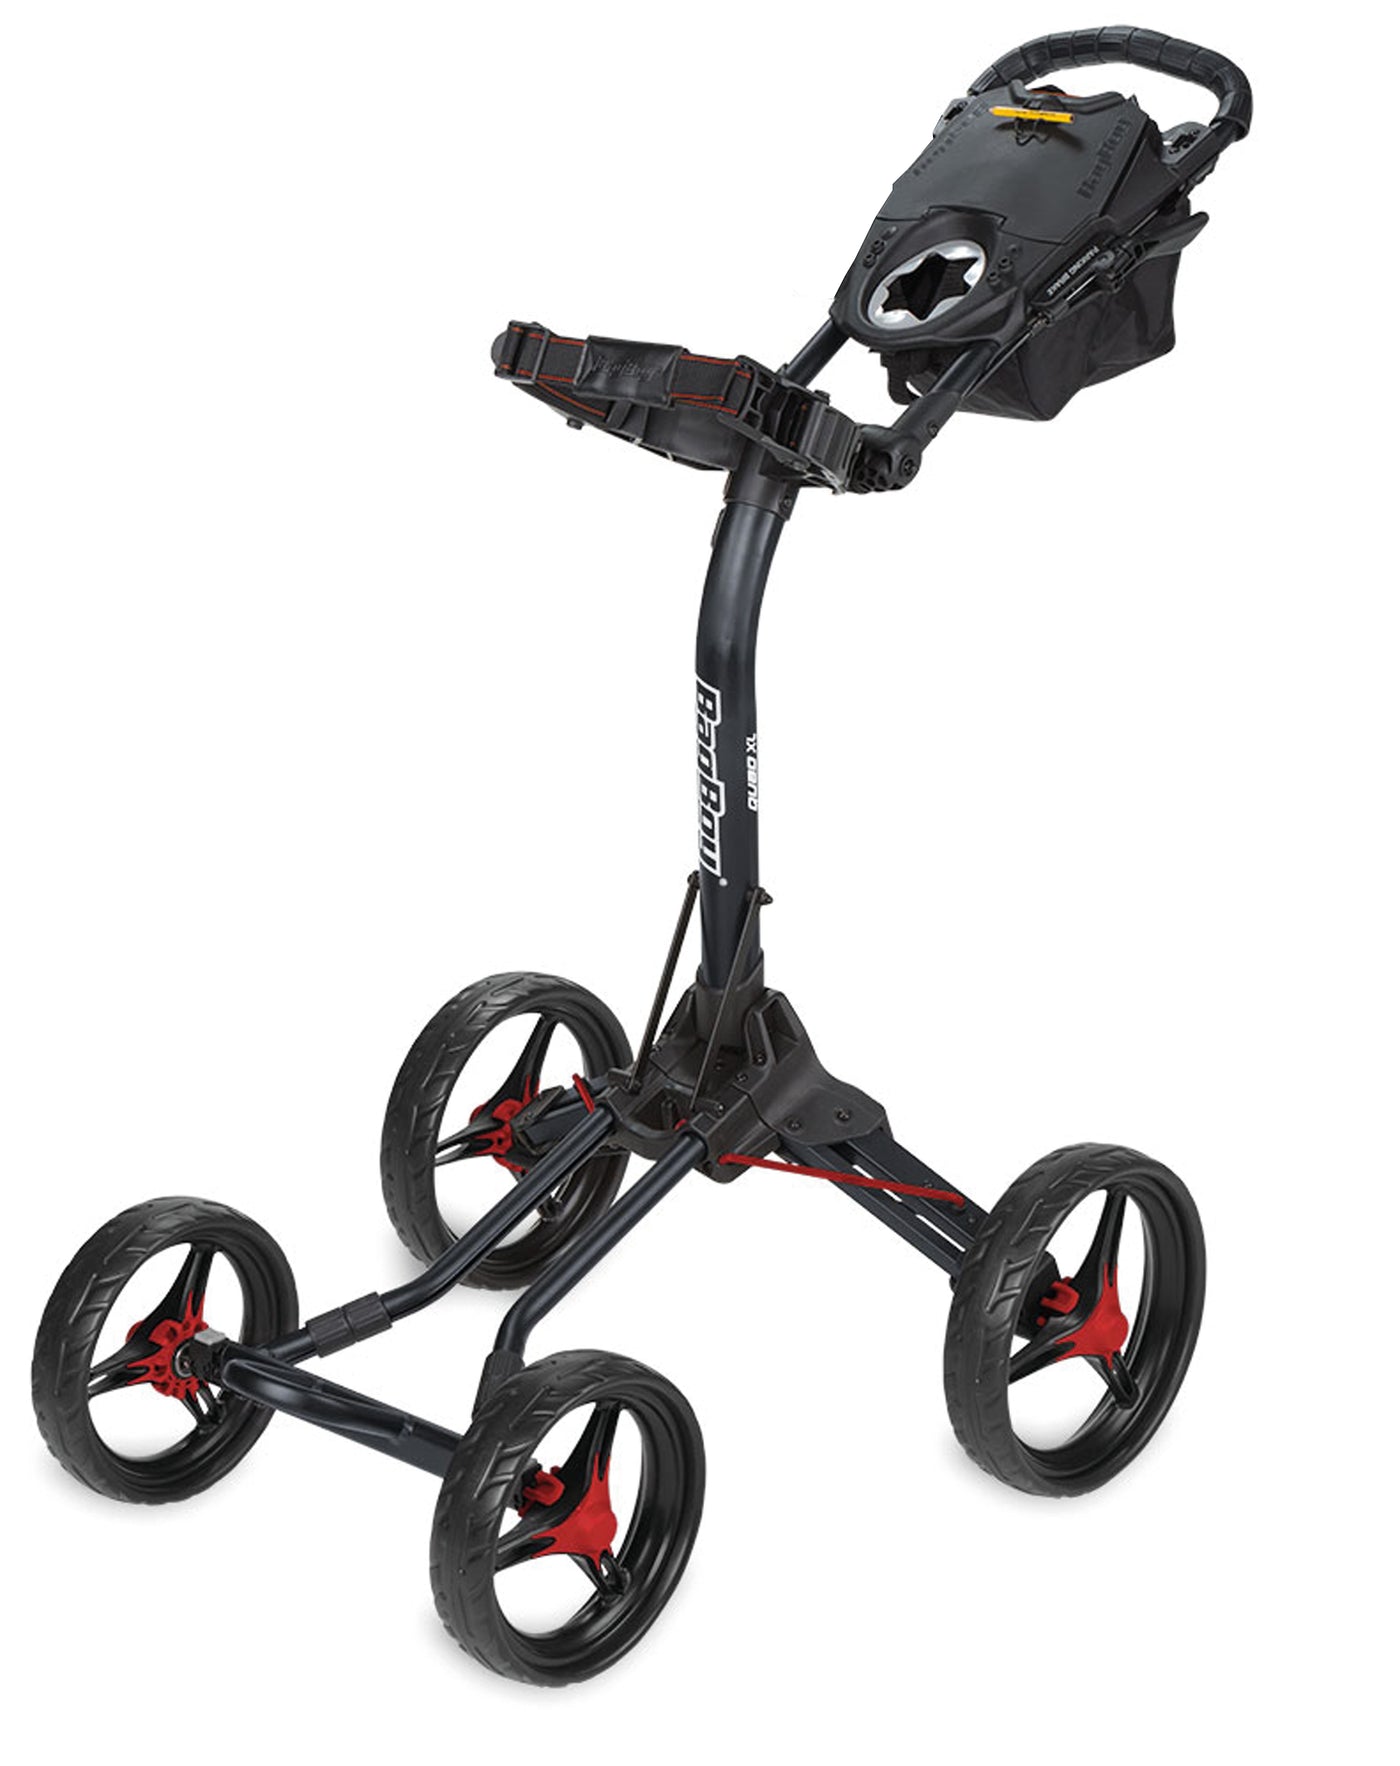 BagBoy 4-wheel golf trolley QUAD XL – The compact functional perfectionist on 4 wheels